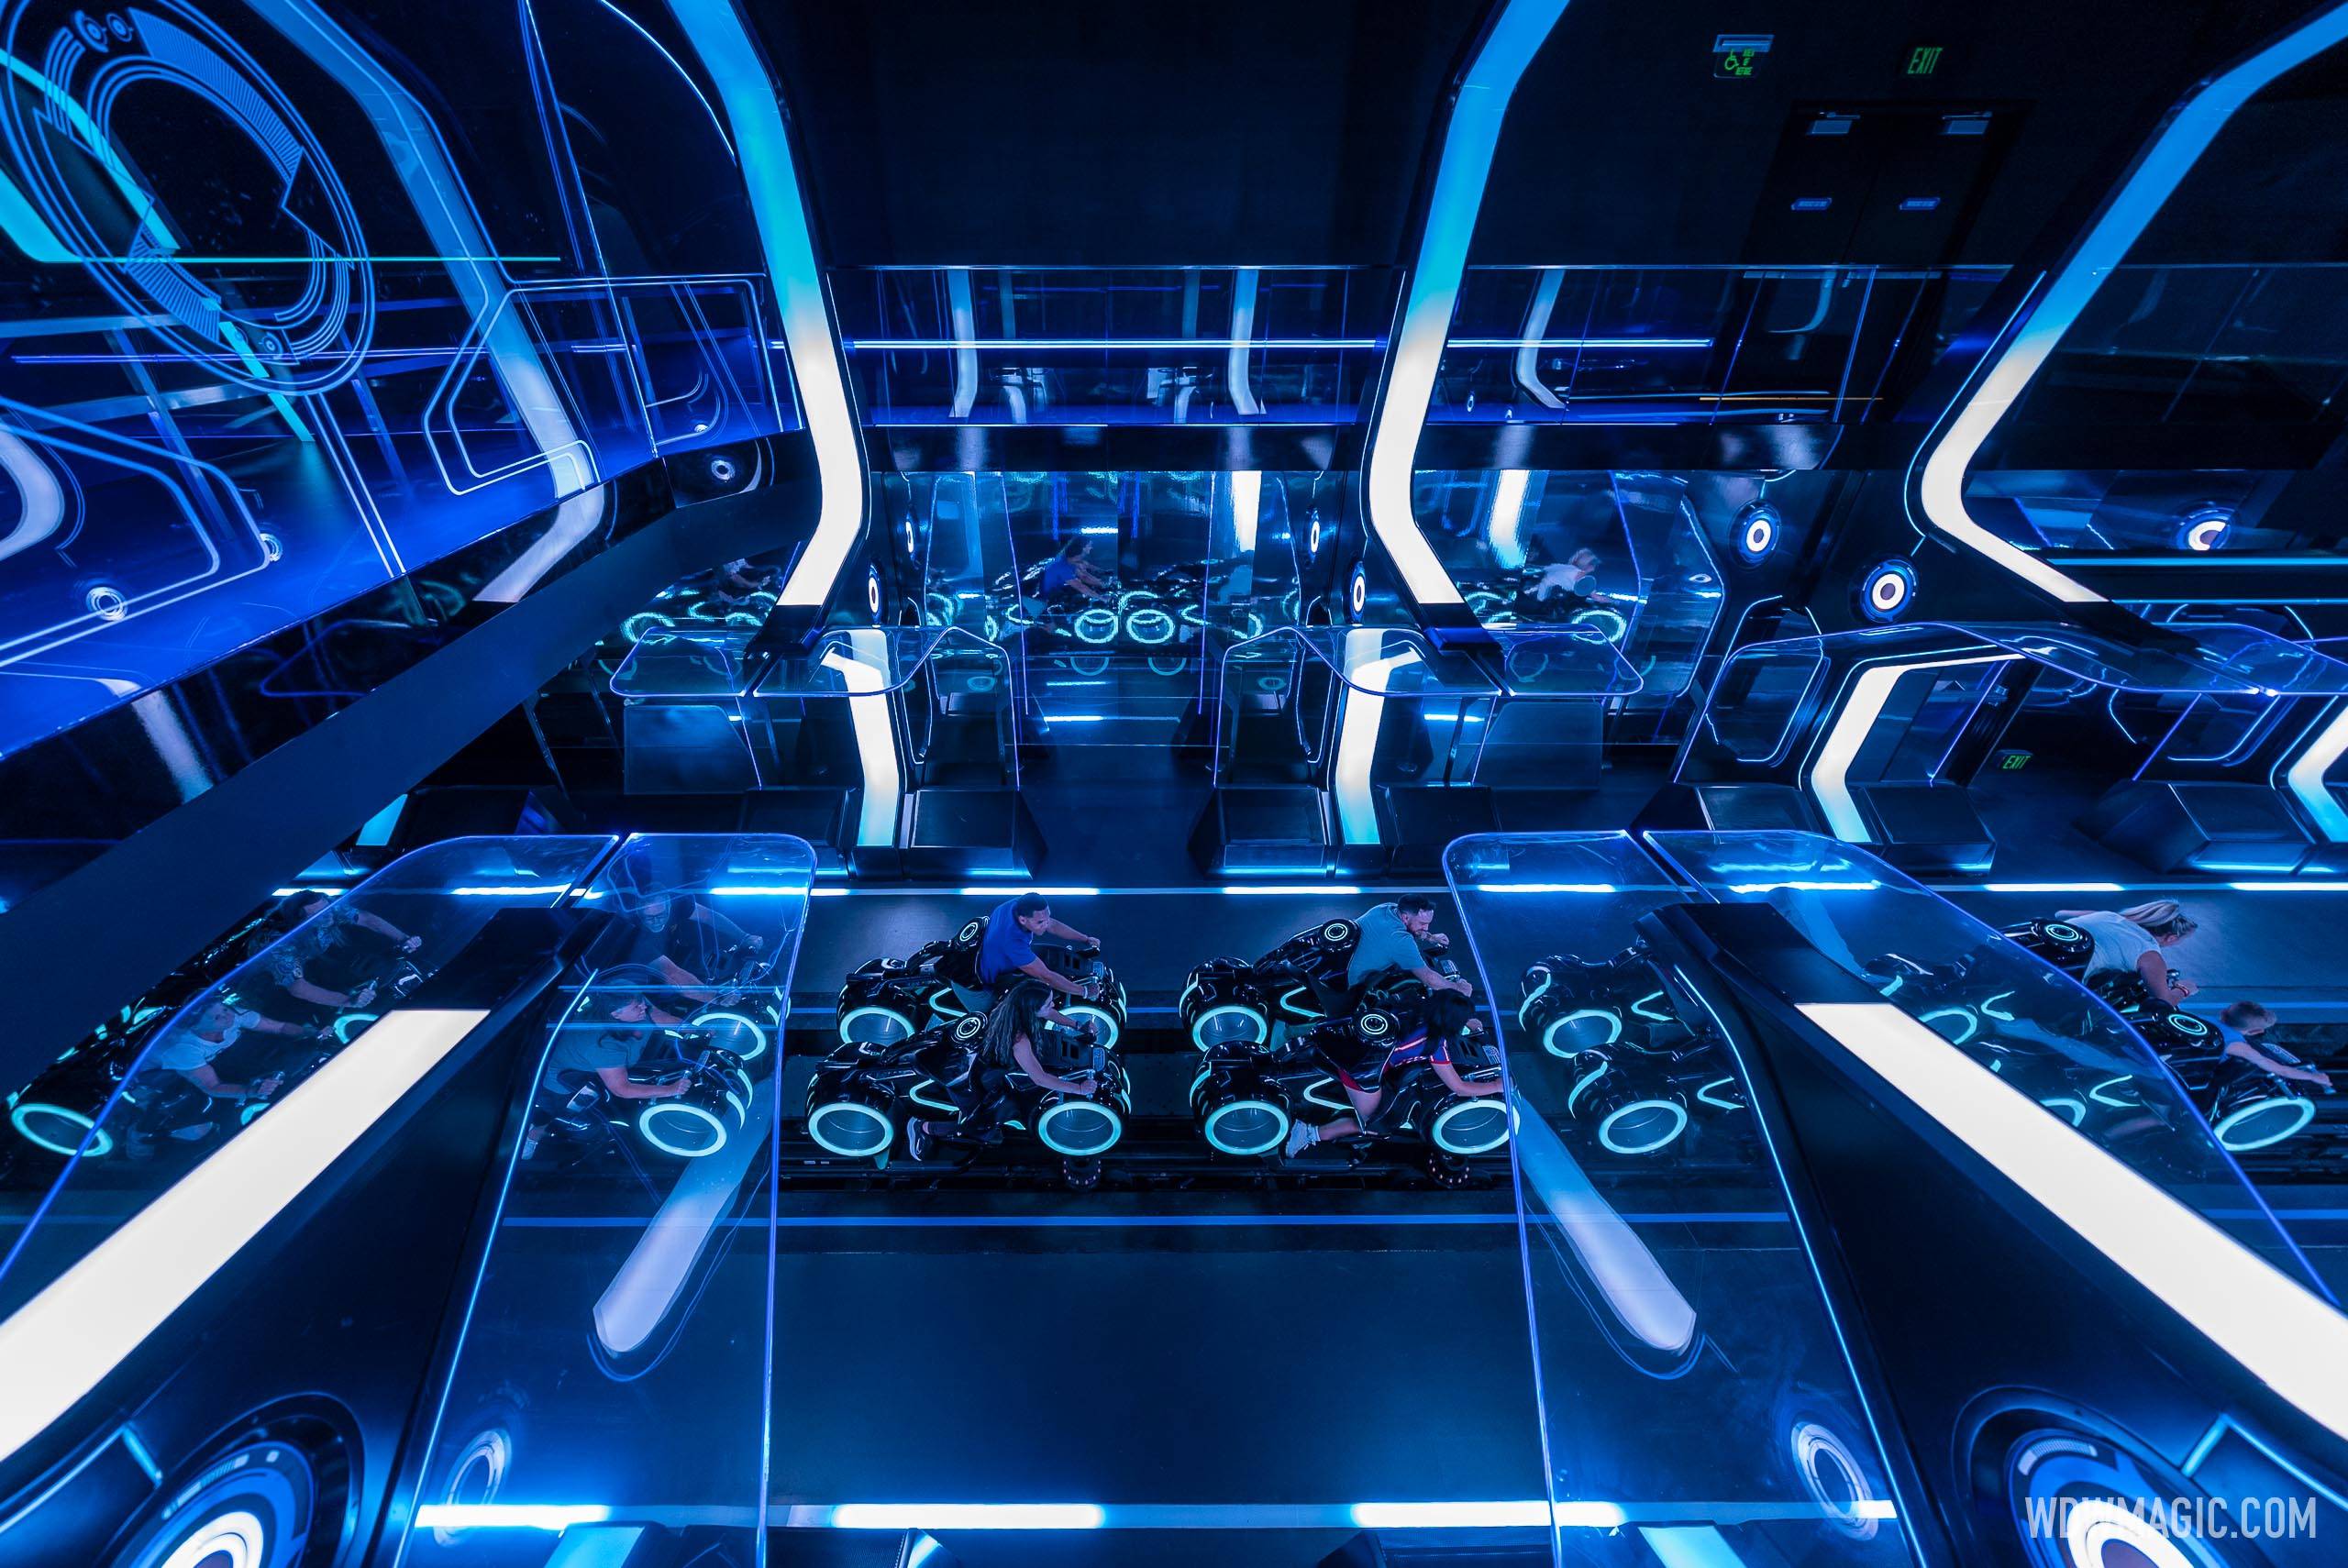 TRON Lightcycle Run will operate a regular standby line during Disney After Hours